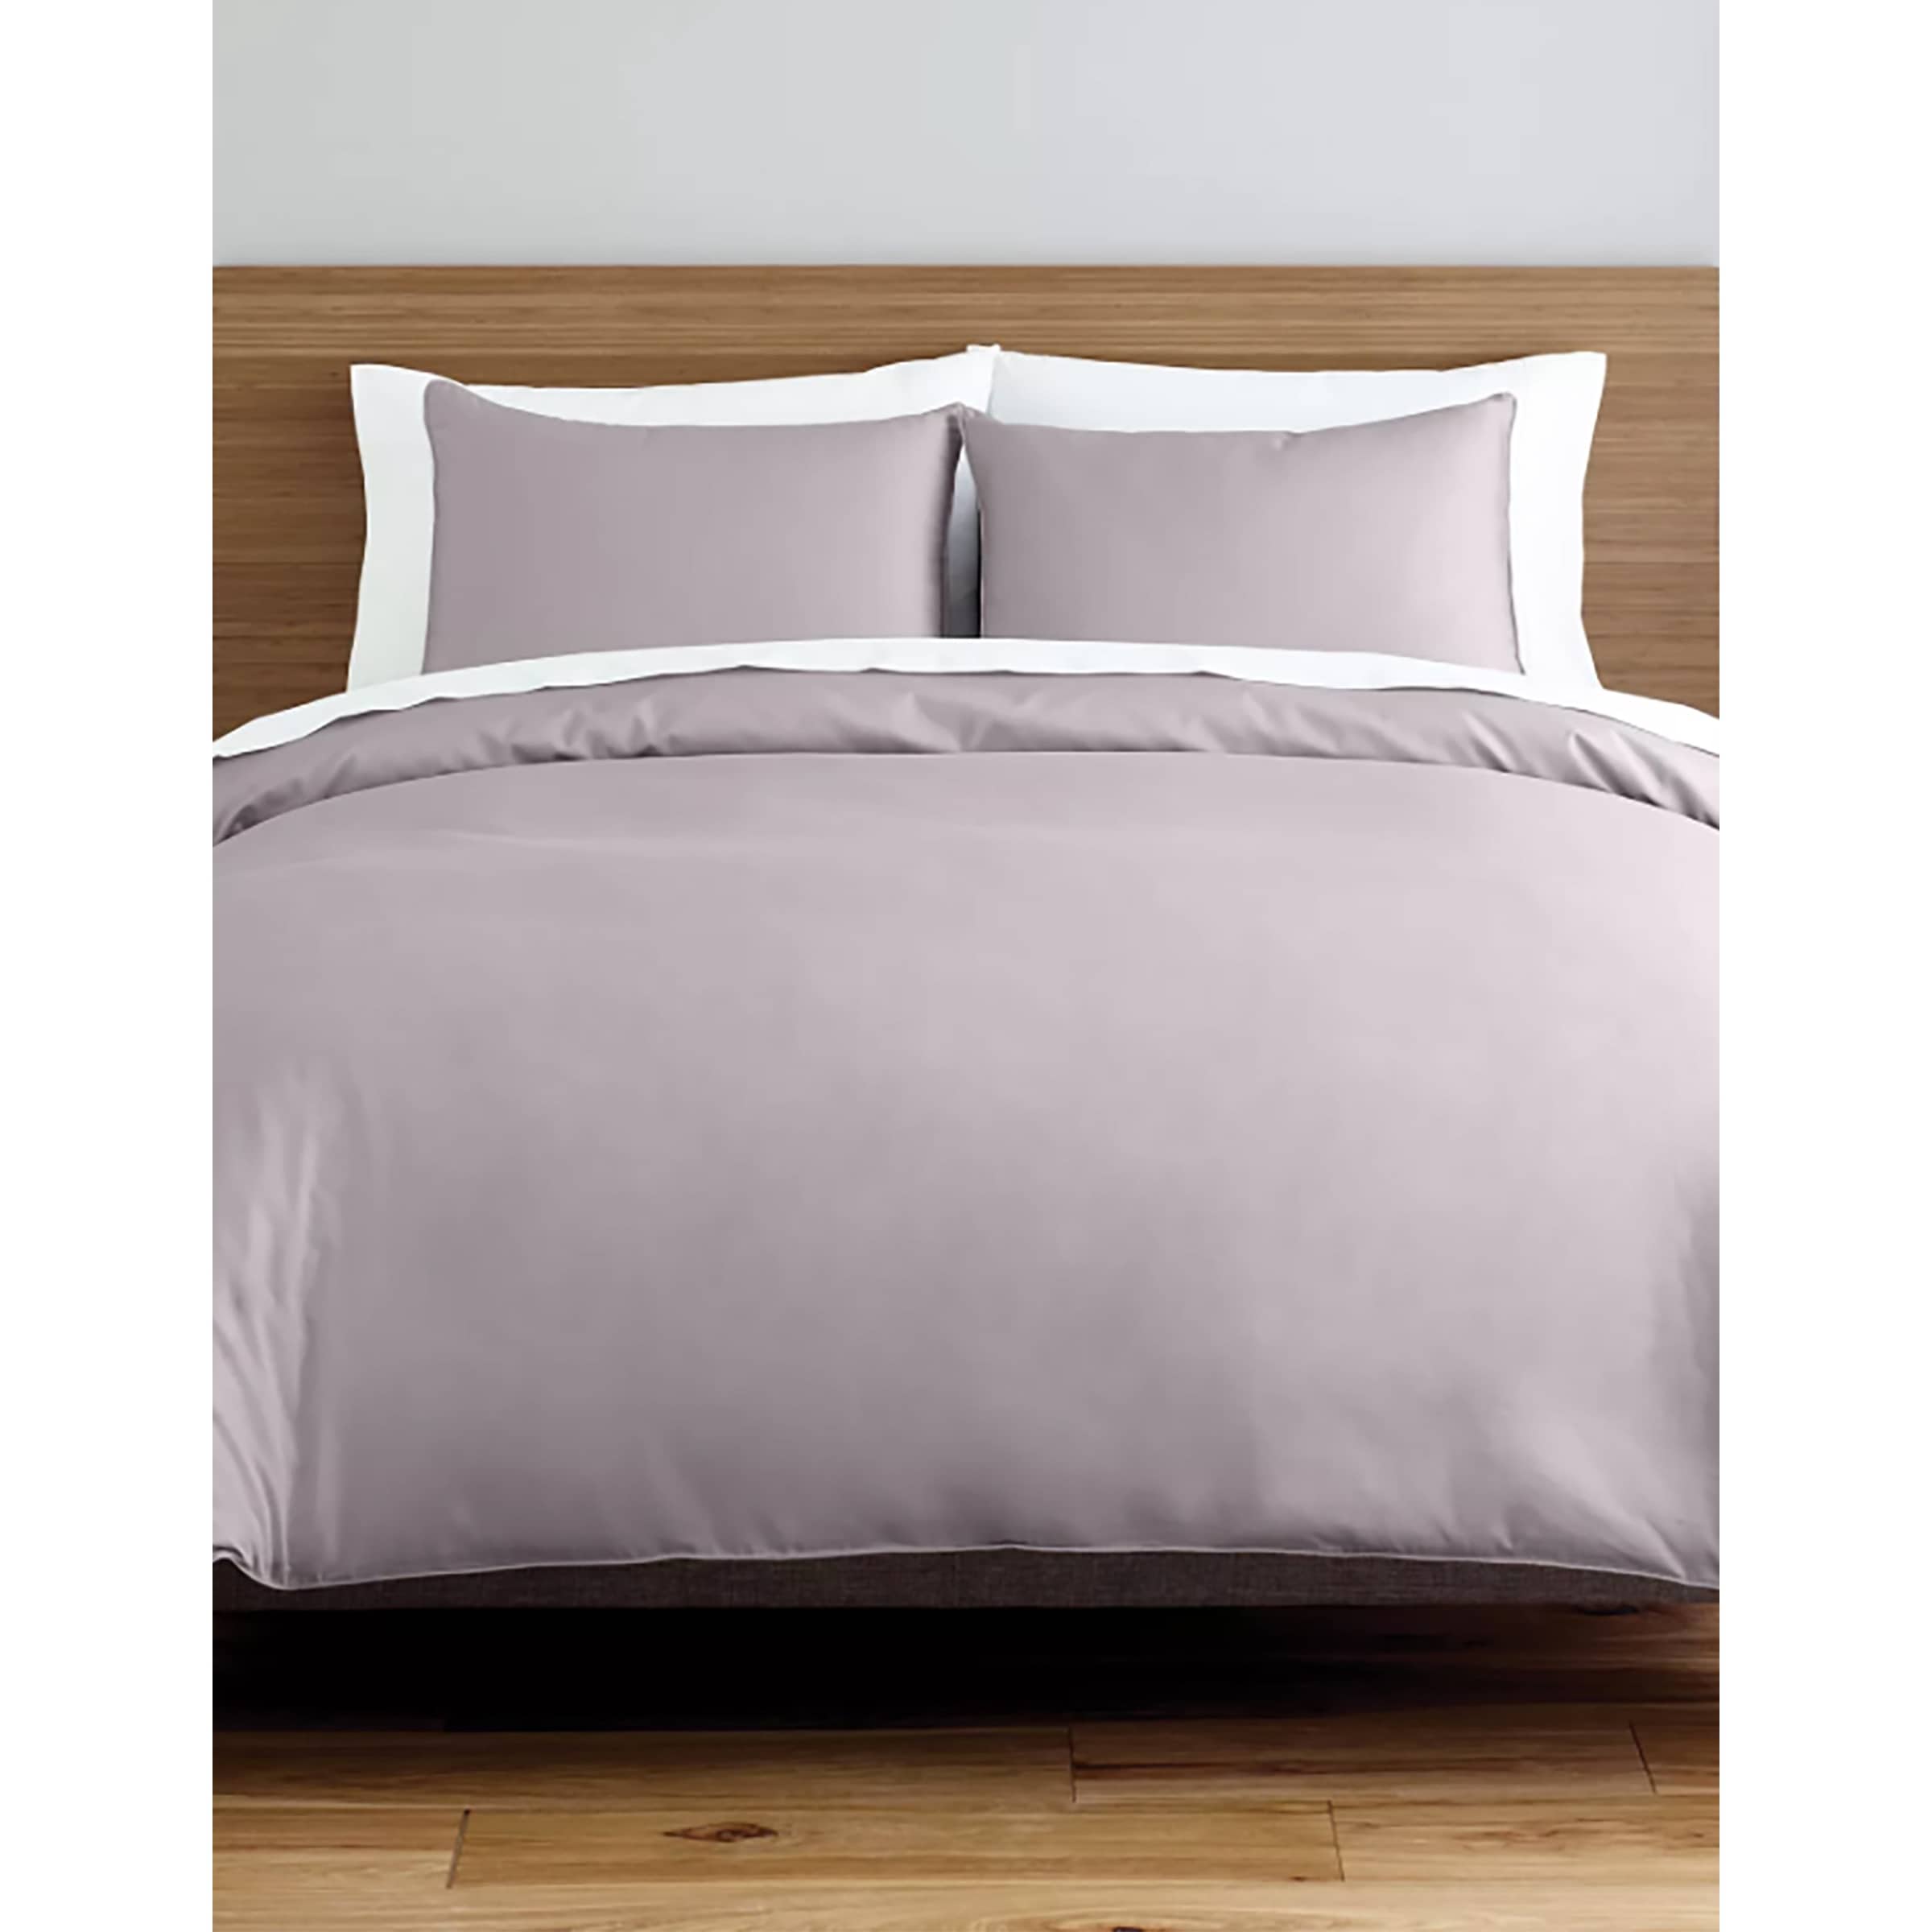 https://ak1.ostkcdn.com/images/products/is/images/direct/3d1121dff2c9d5b89c1a14de67eba1dee97e2559/Nestwell-450TC-Duvet-Set.jpg